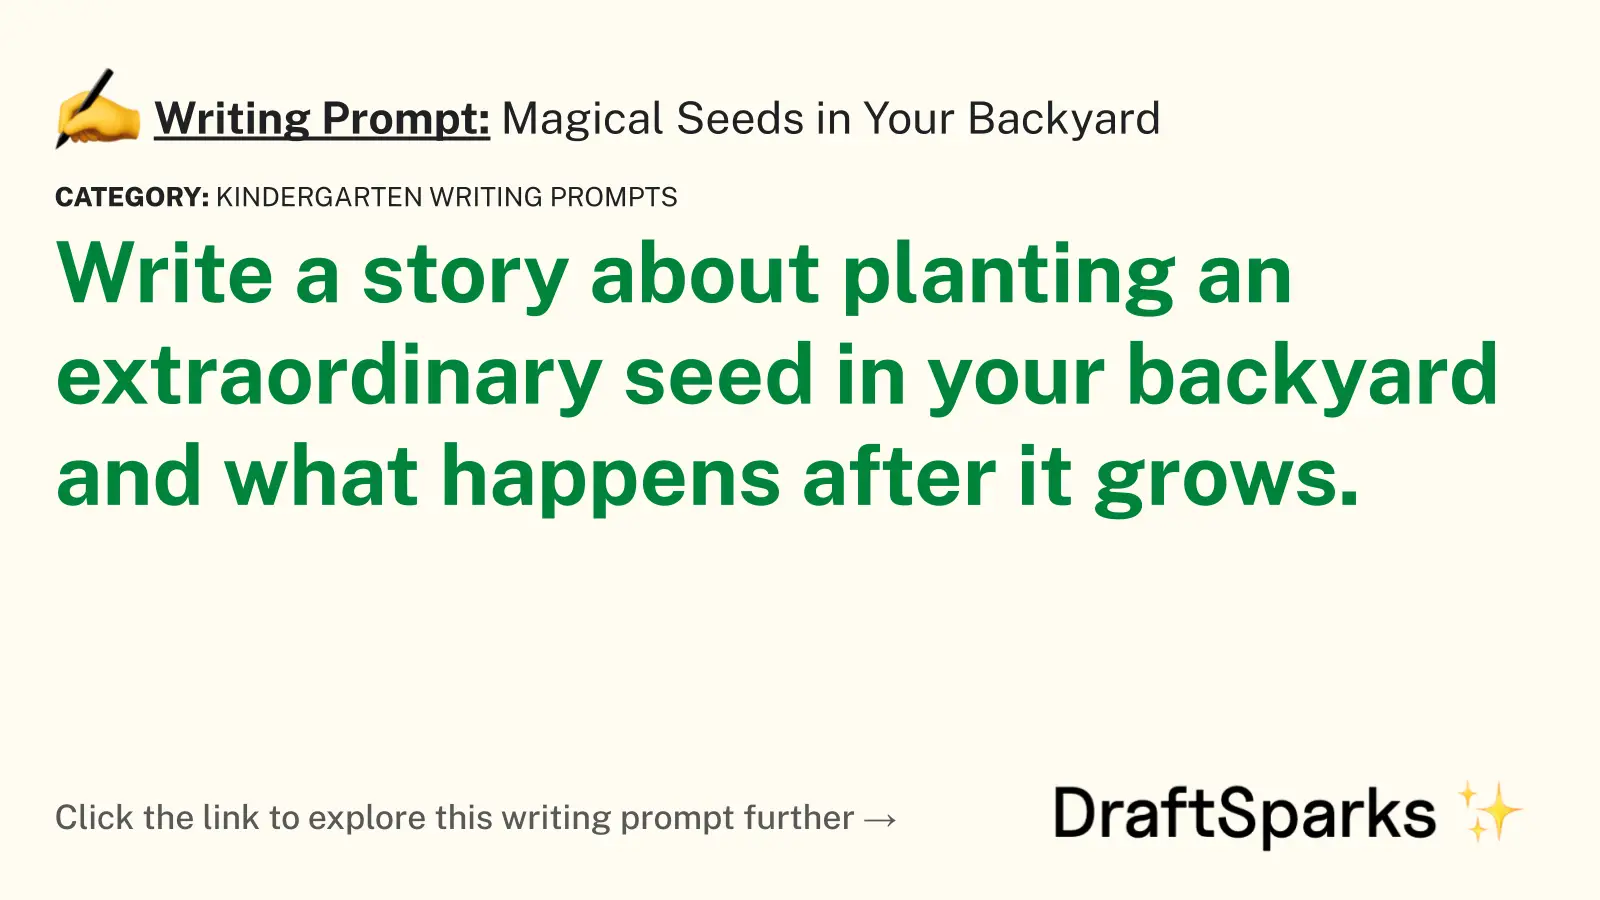 Magical Seeds in Your Backyard